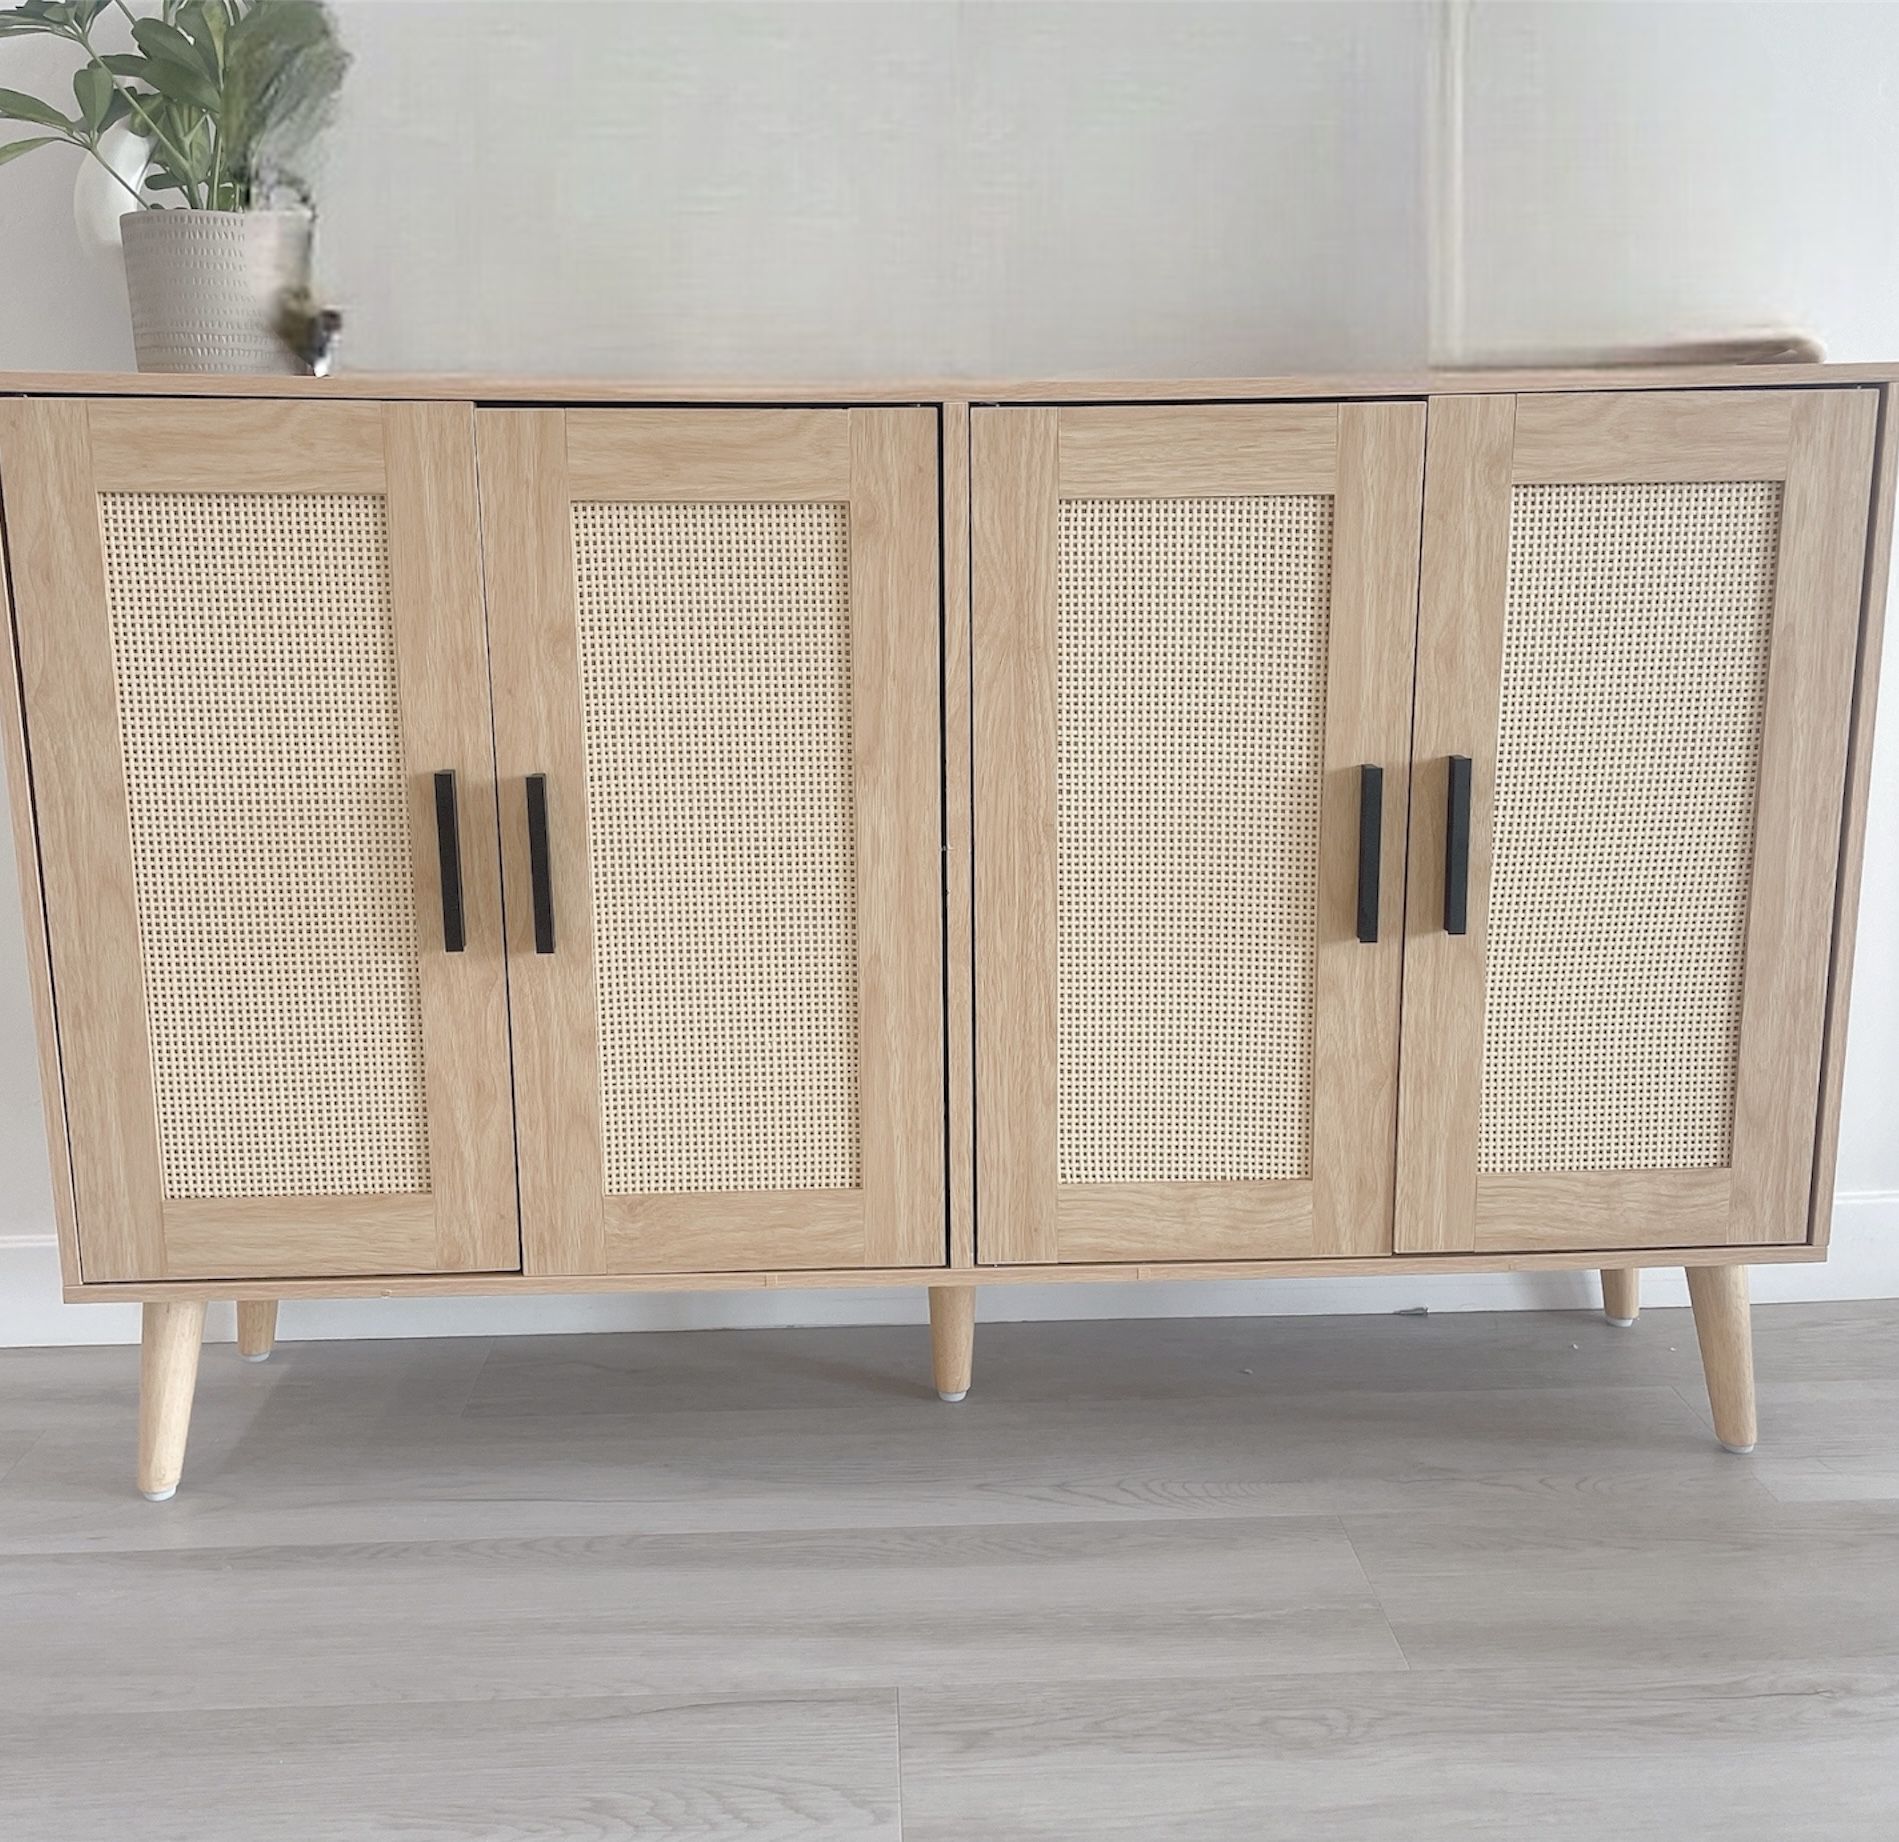 Sideboard Buffet Kitchen Storage Cabinet Rattan Decorated Doors Dining Room Hallway console table